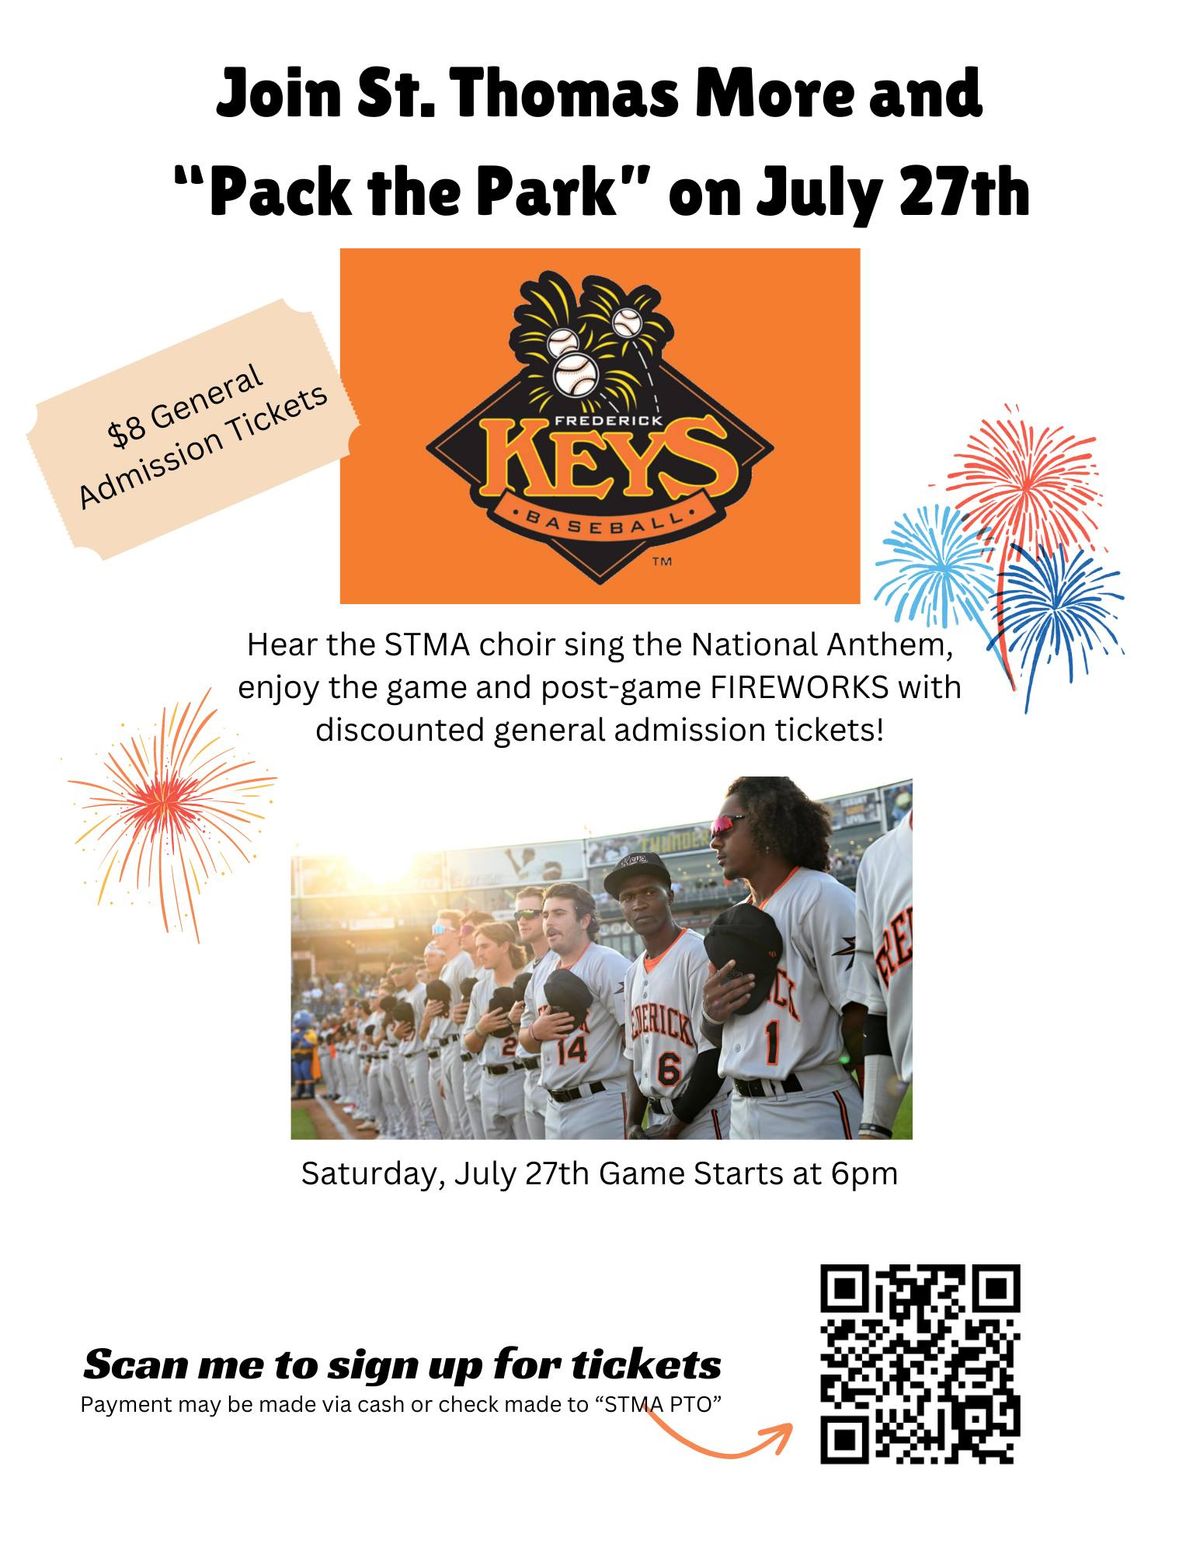 Help STMA Pack the Park